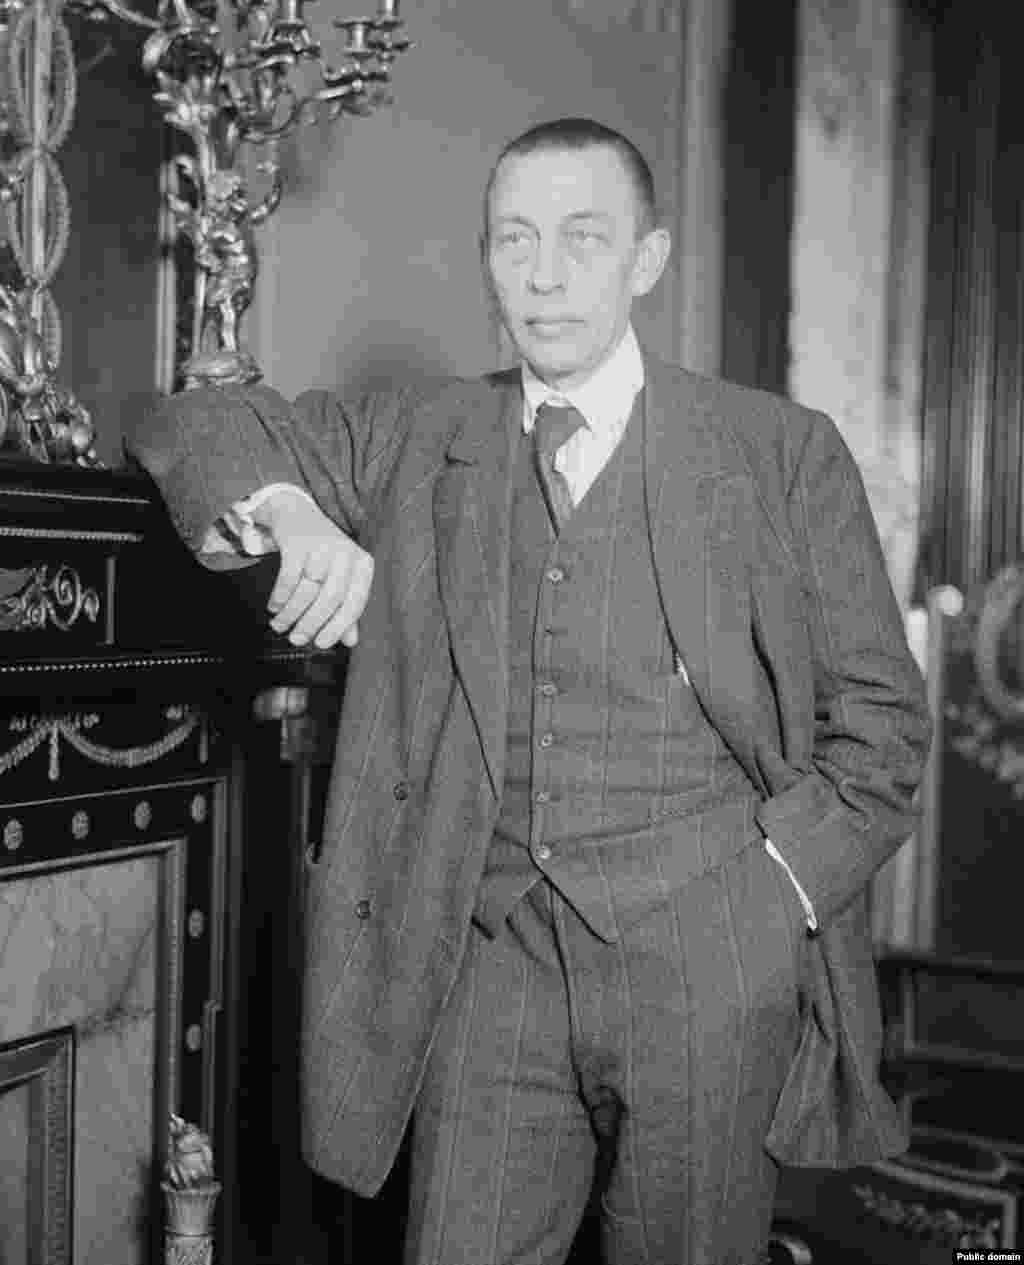 An undated portrait. After his emigration, Soviet officials labeled Rachmaninoff a &quot;reactionary&quot; and &quot;an enemy of the Soviet government.&quot; His work as a composer dropped off sharply after leaving Russia, although he toured widely as a pianist.